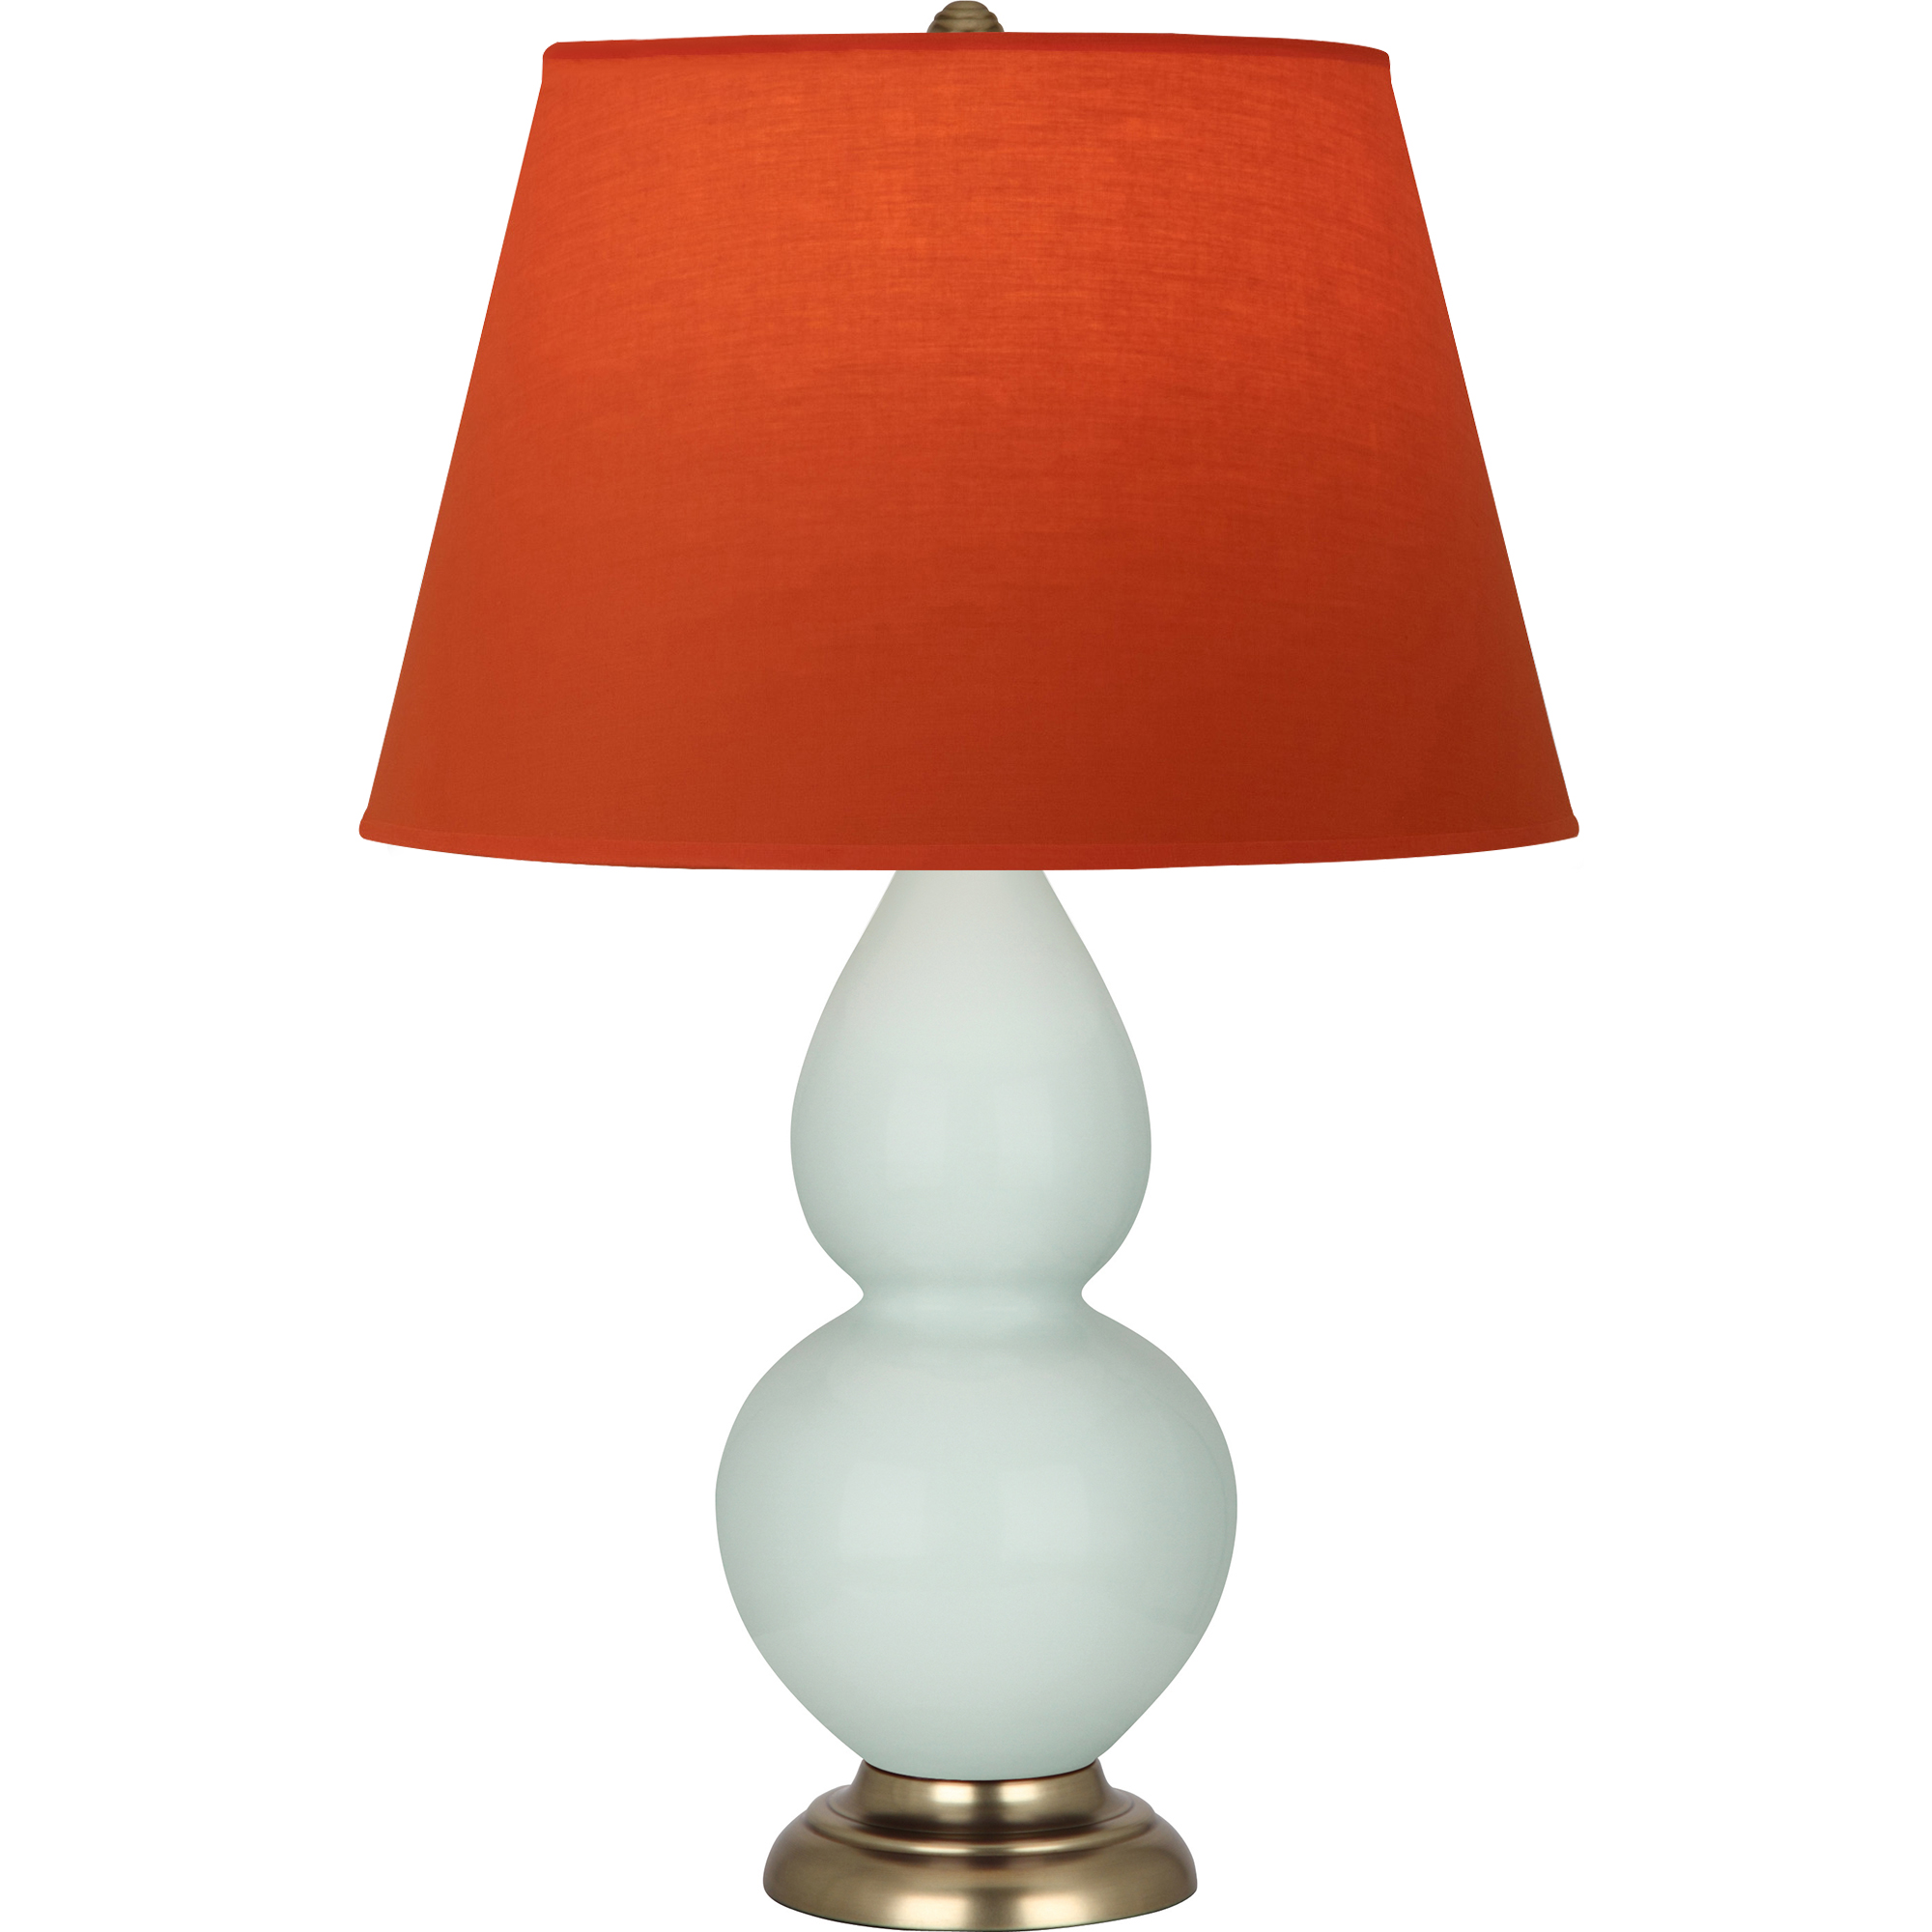 Double Gourd Table Lamp Style #1789T